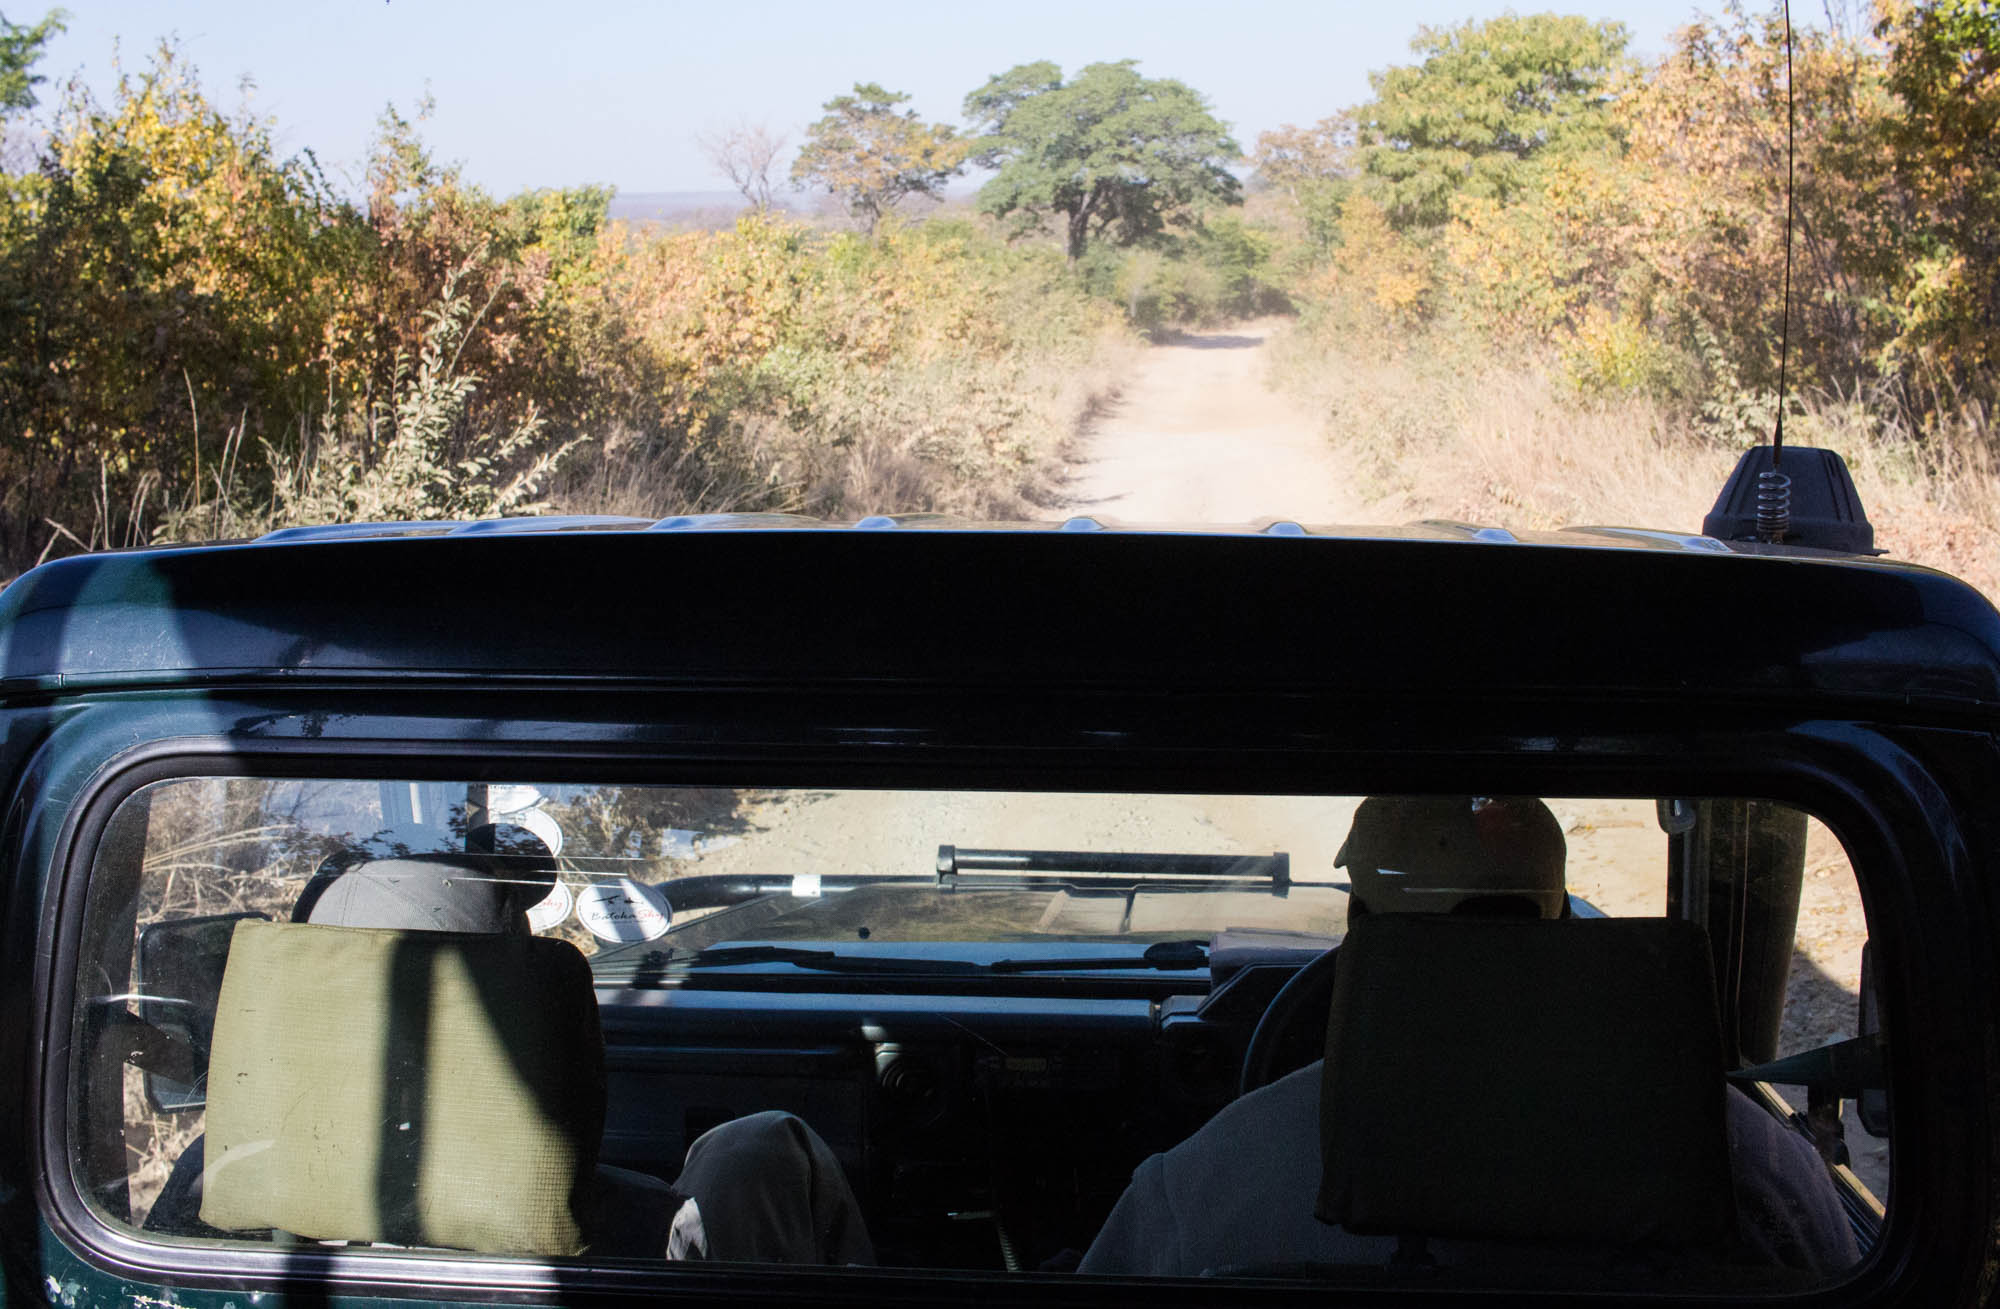 5 things to do at the victoria falls zambia, by kathi kamleitner | travelettes.net